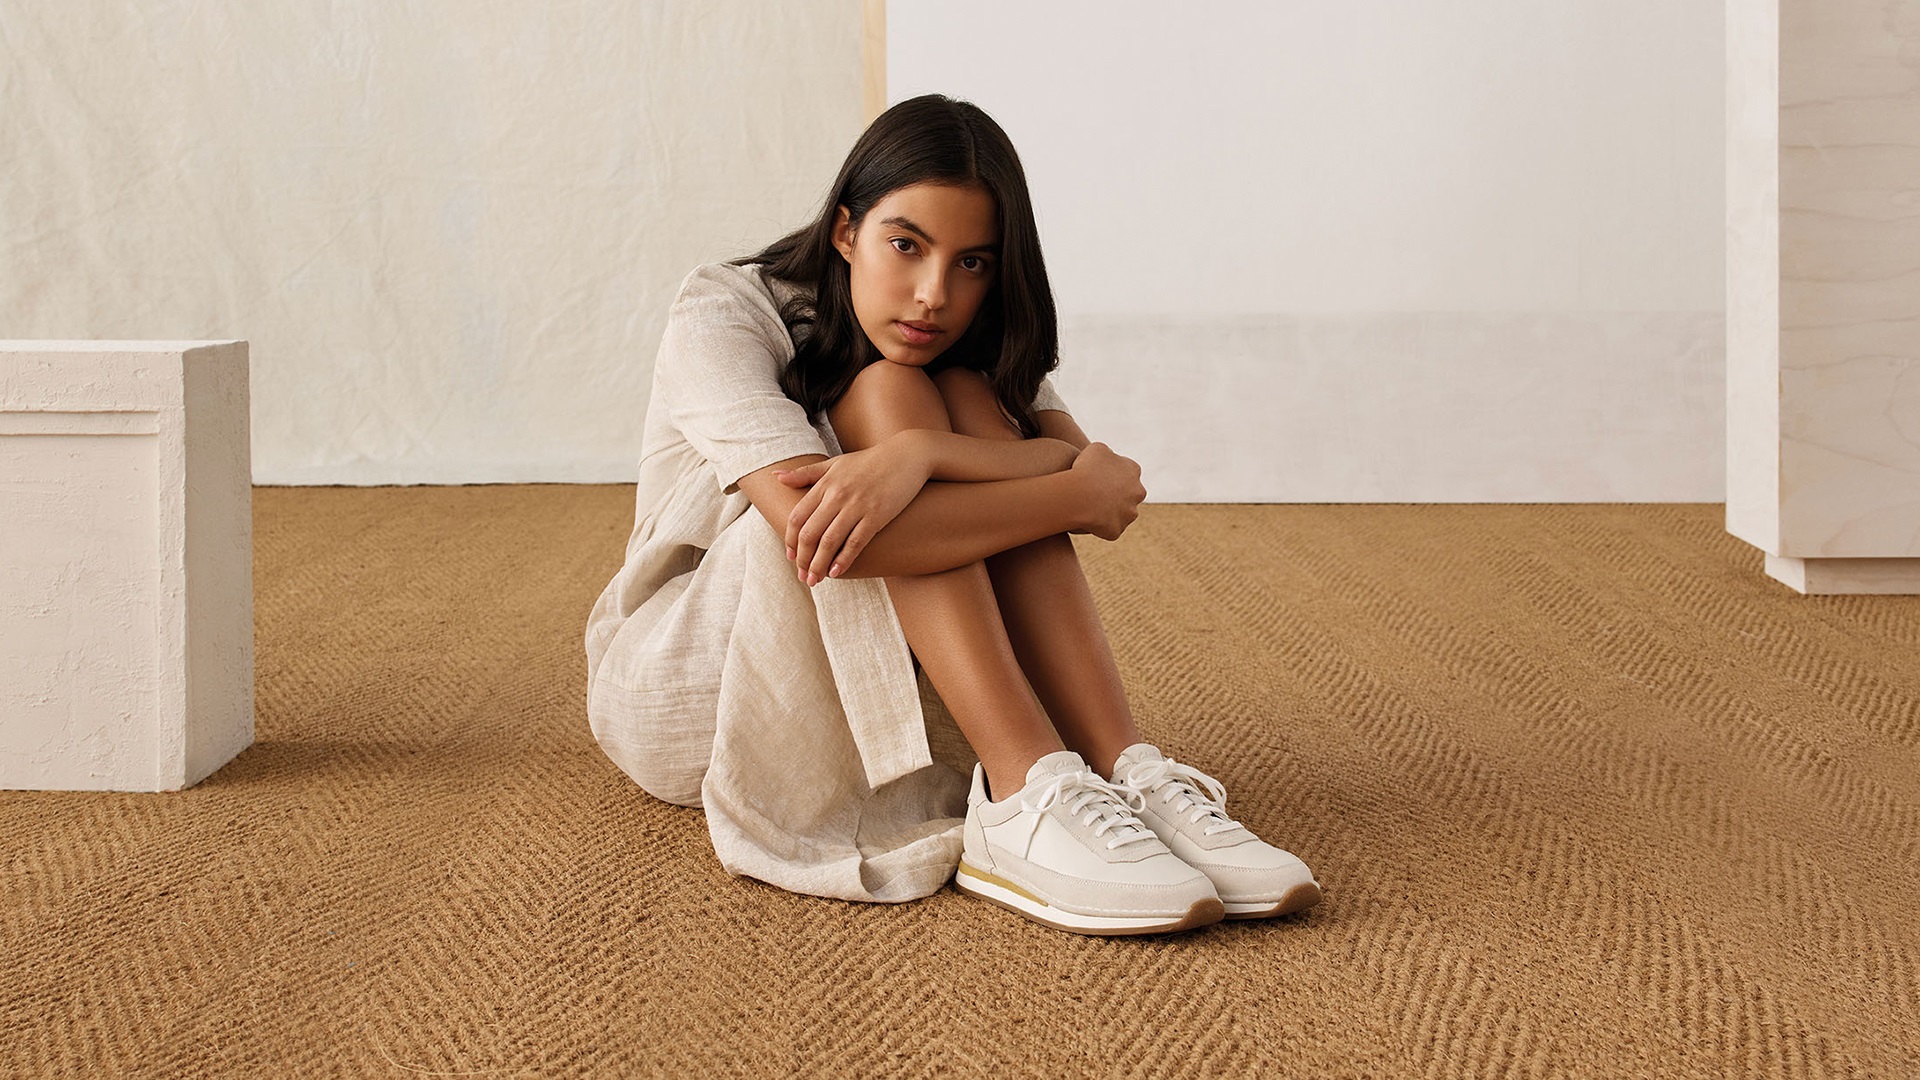 Girl on the floor with a clarks sneakers